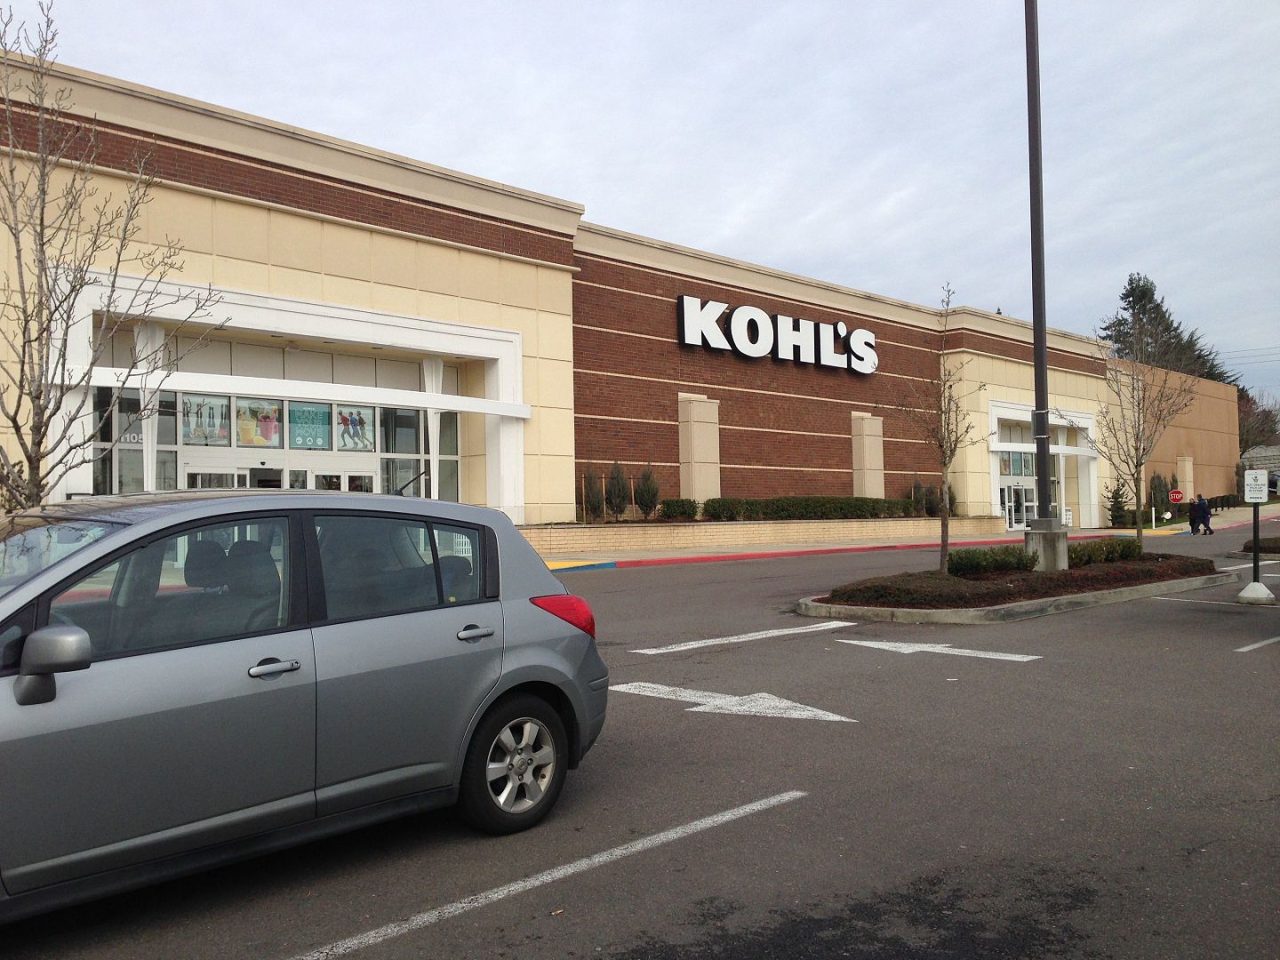 Babies R Us to Be Available at Approximately 200 Kohl’s Locations